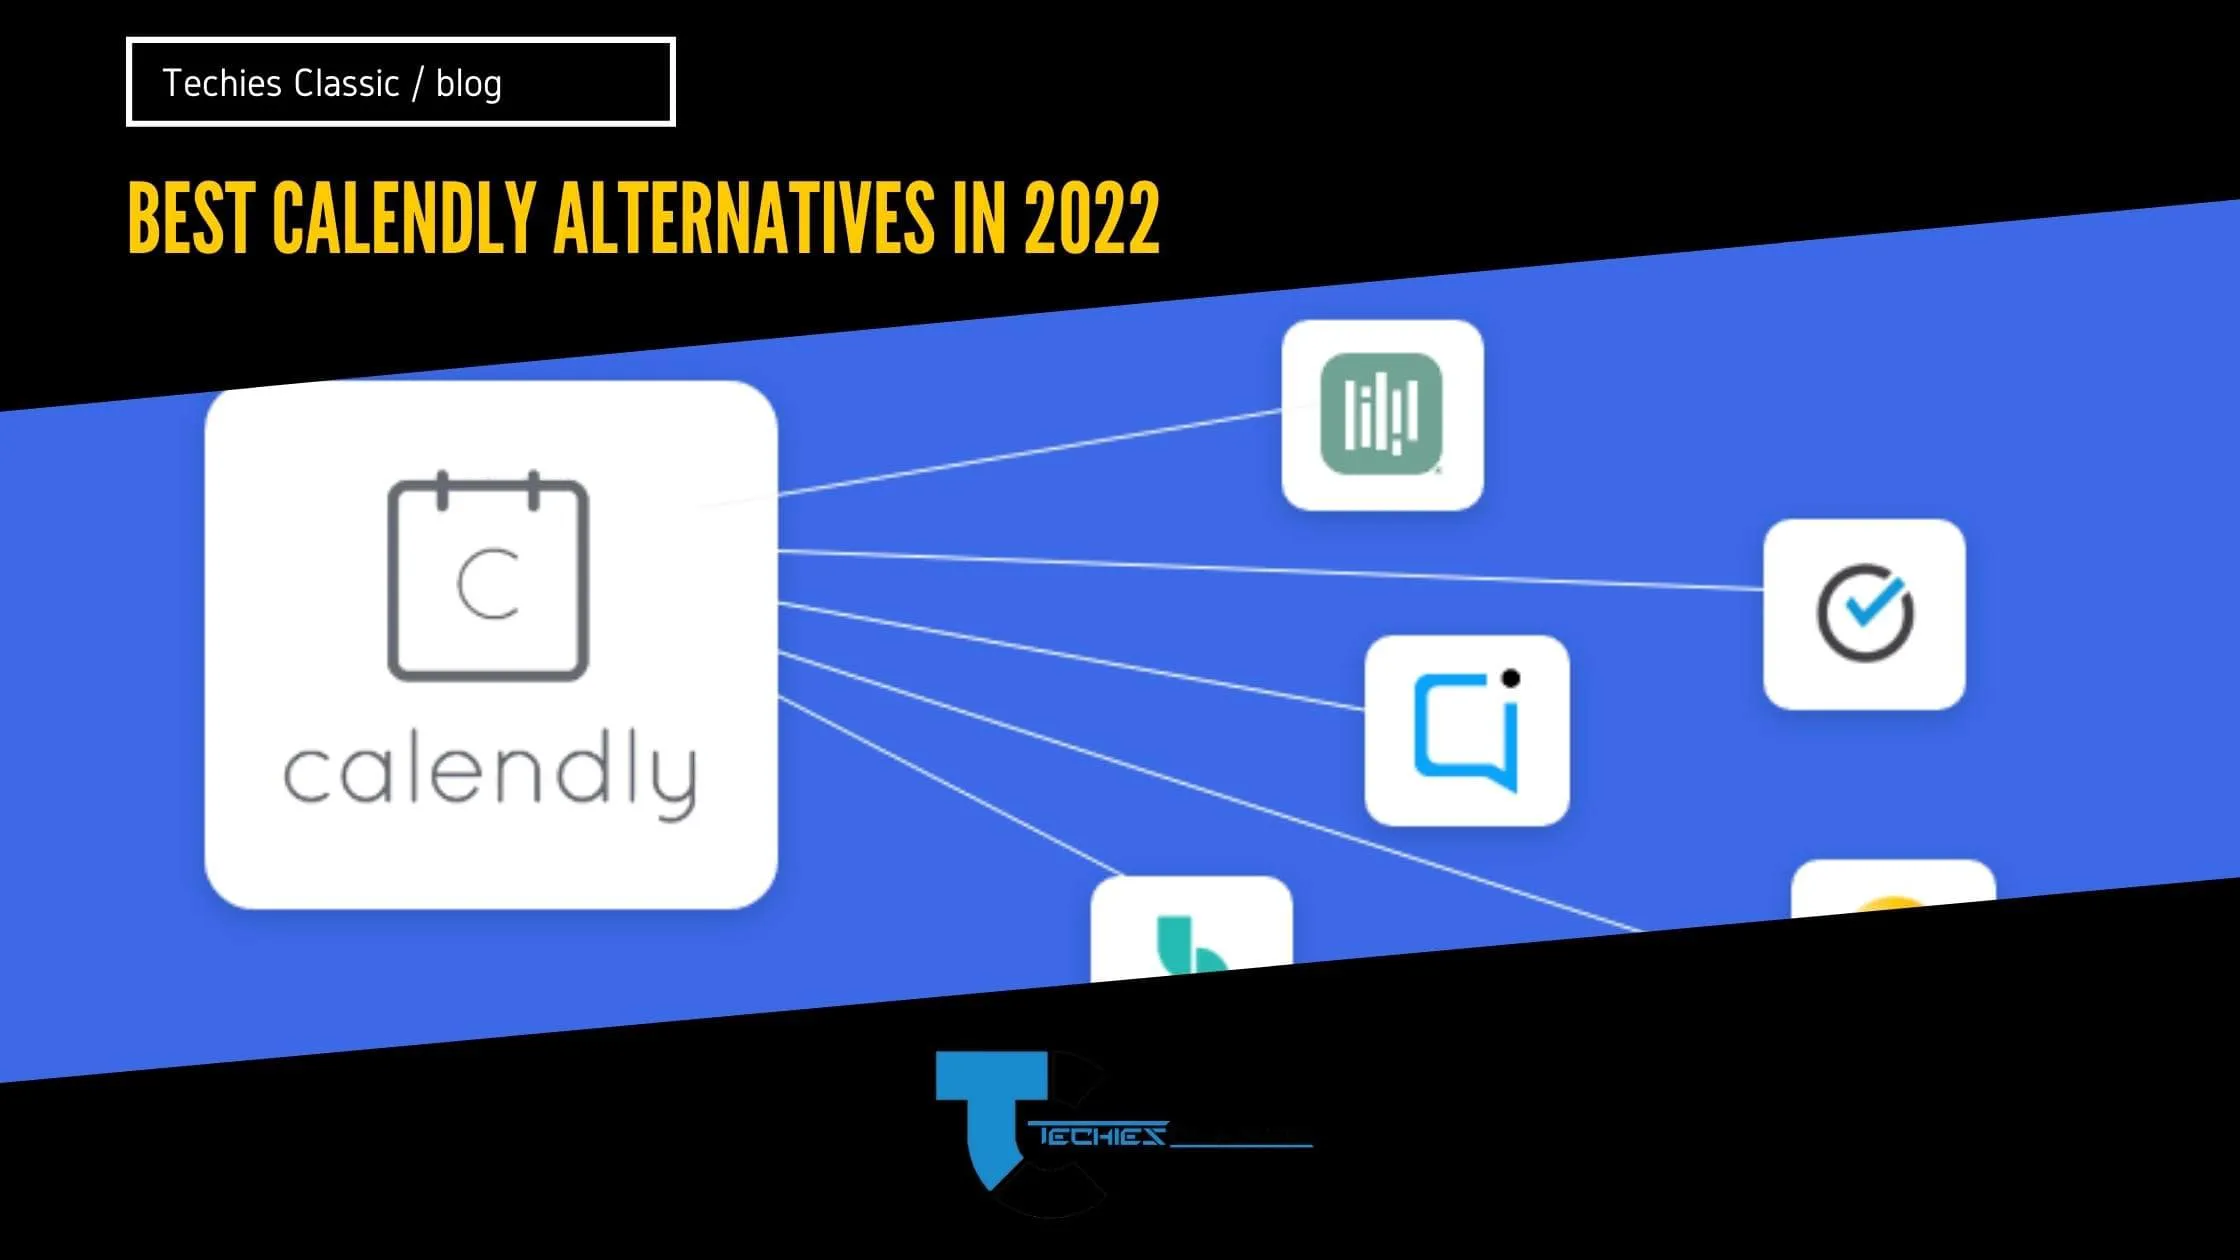 20 best calendly alternatives you should not miss in 2022